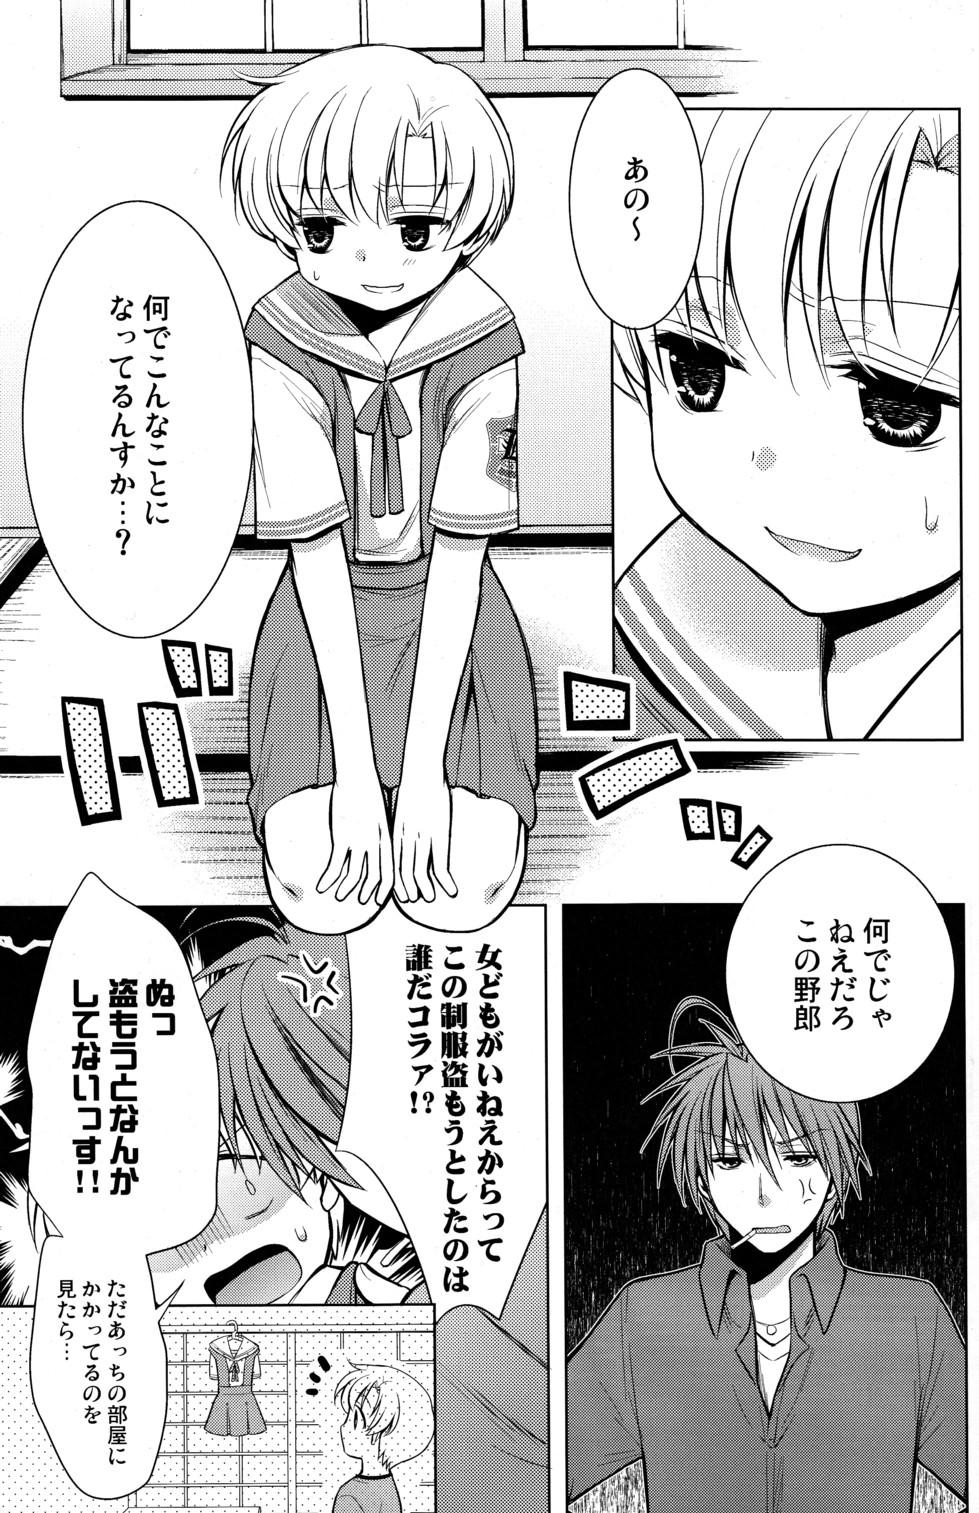 Amatures Gone Wild Sunohara Mania 2 - Clannad Stretching - Page 6